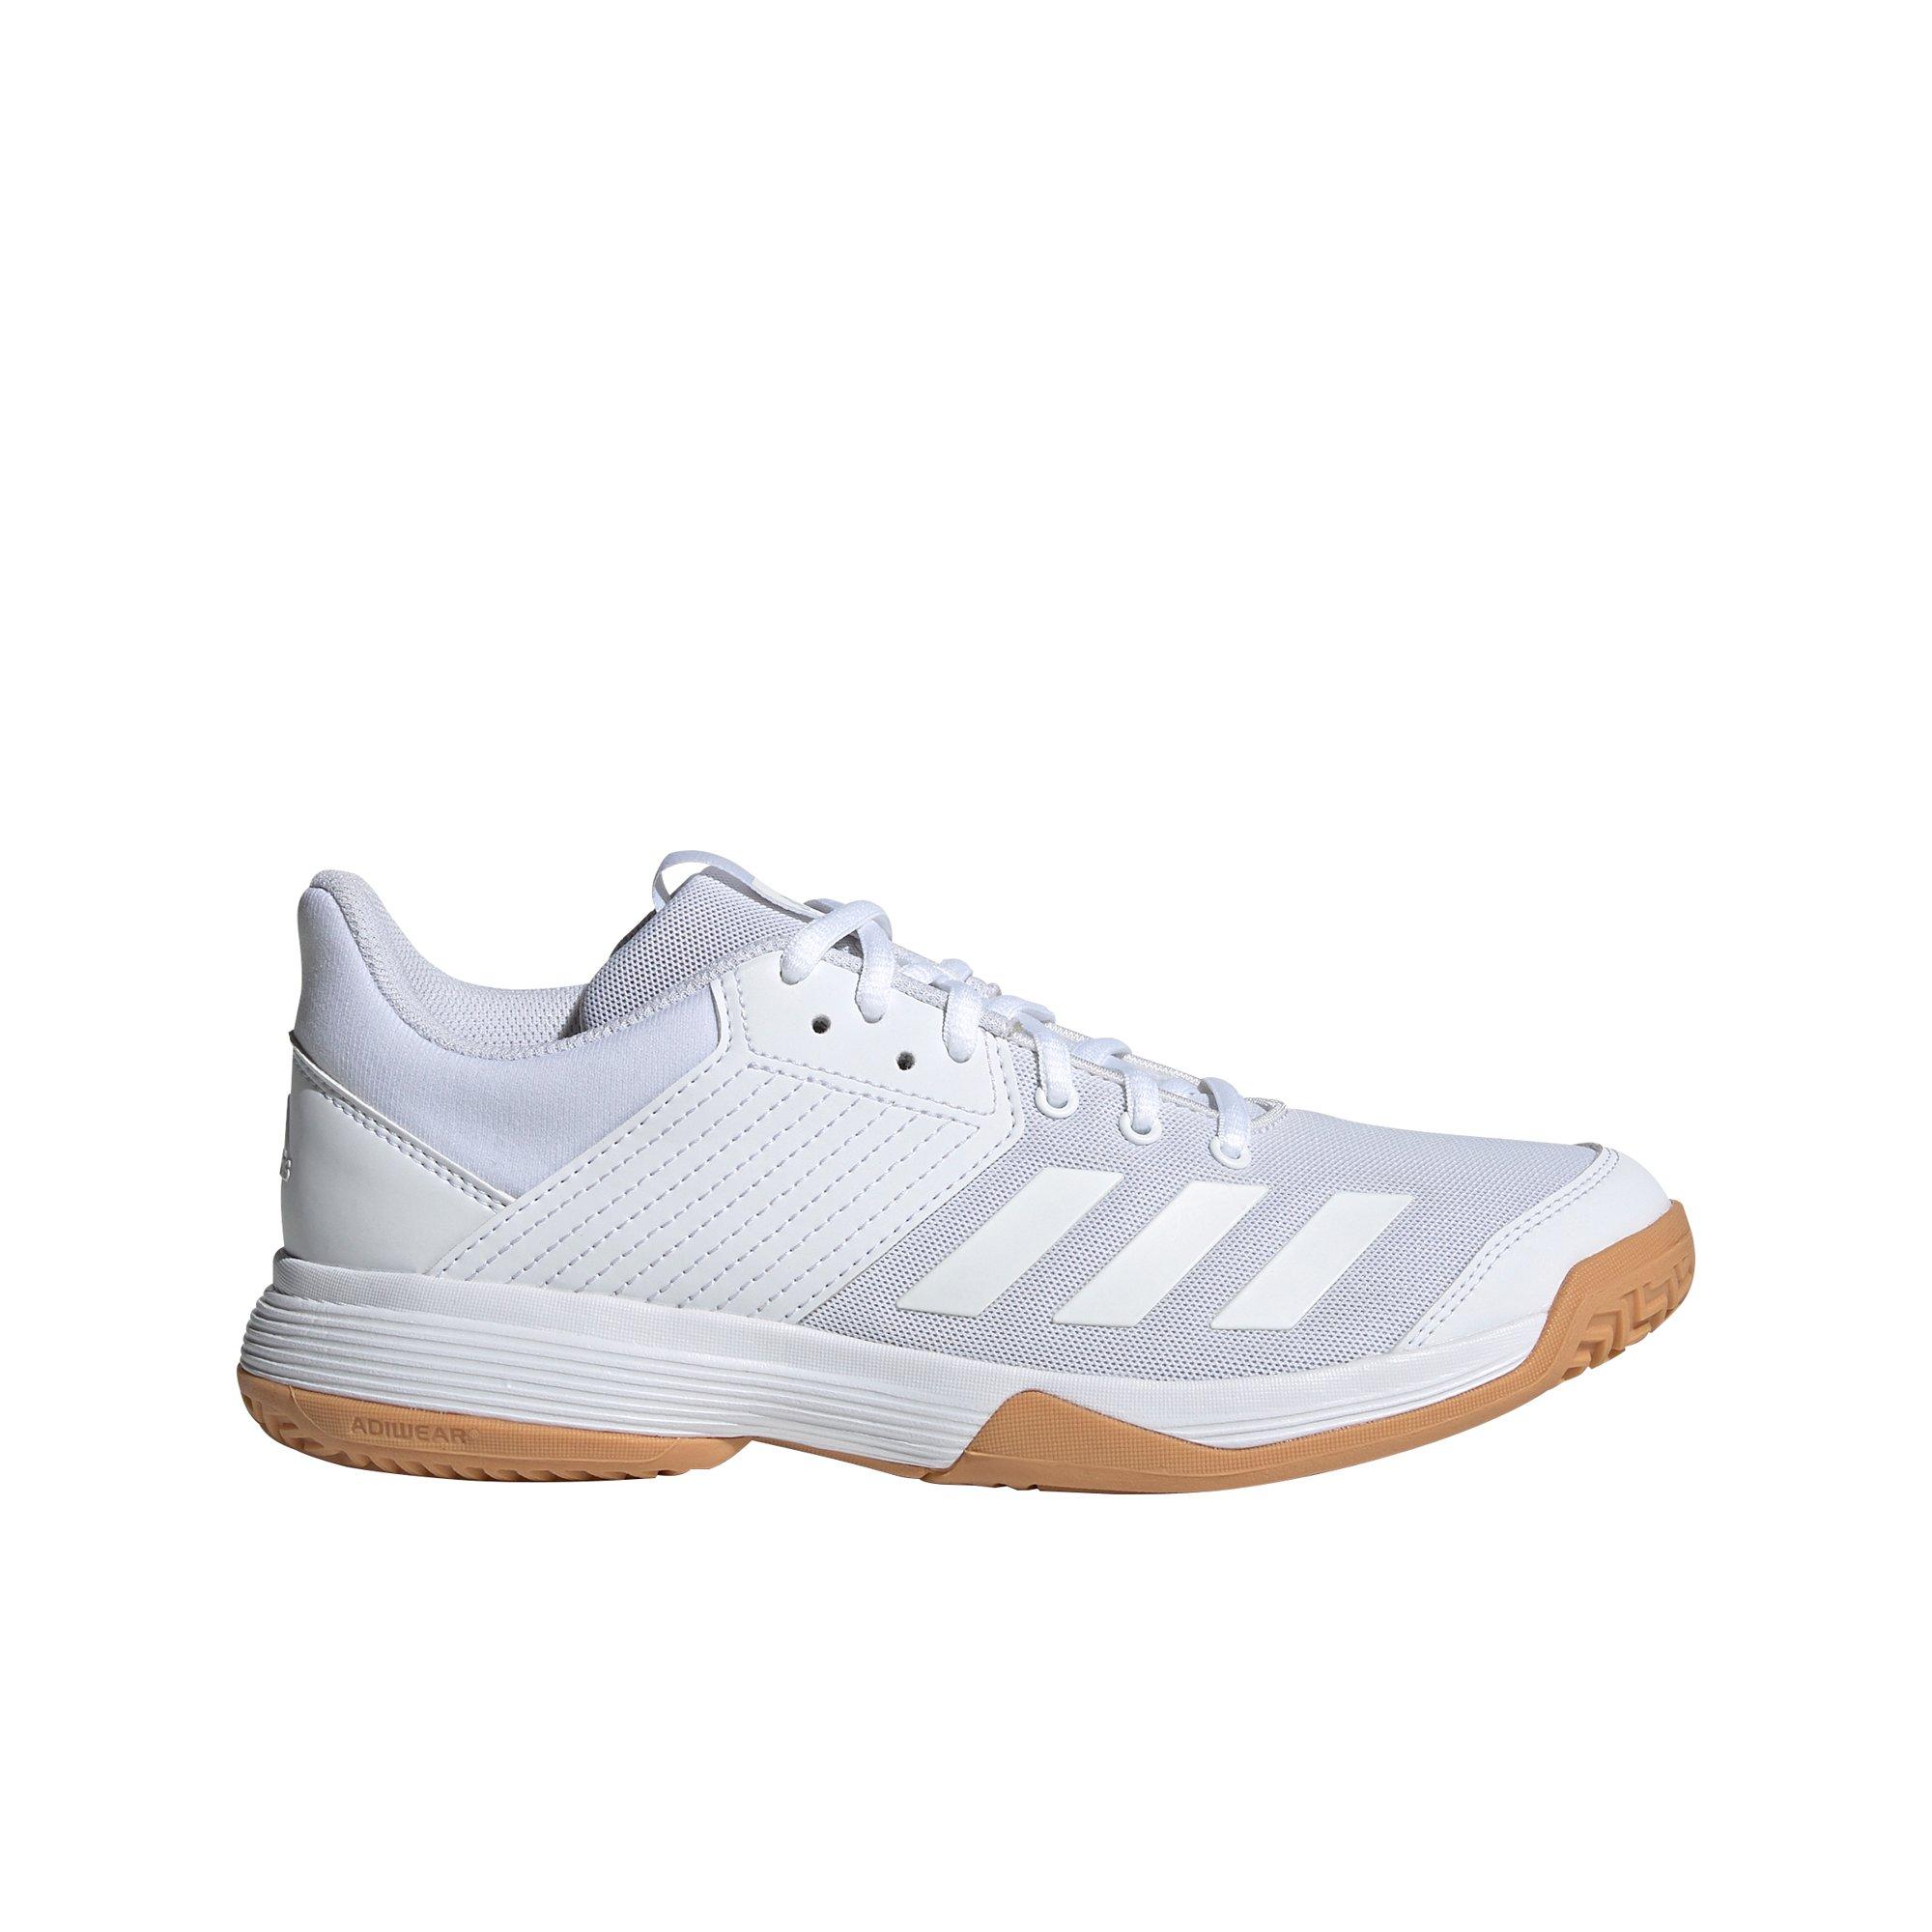 adidas women's volleyball shoes